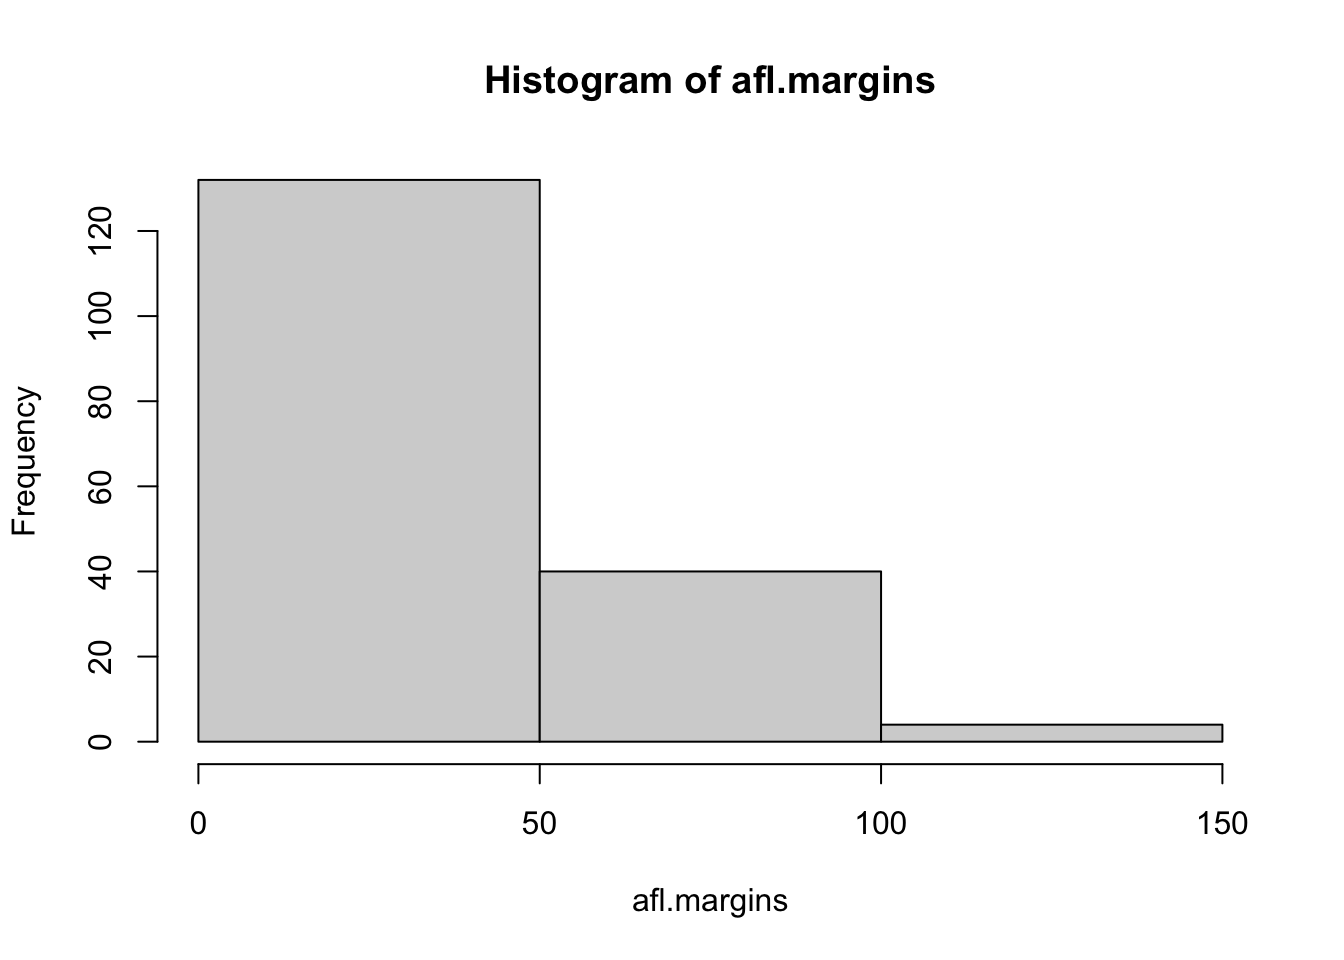 A histogram with too few bins